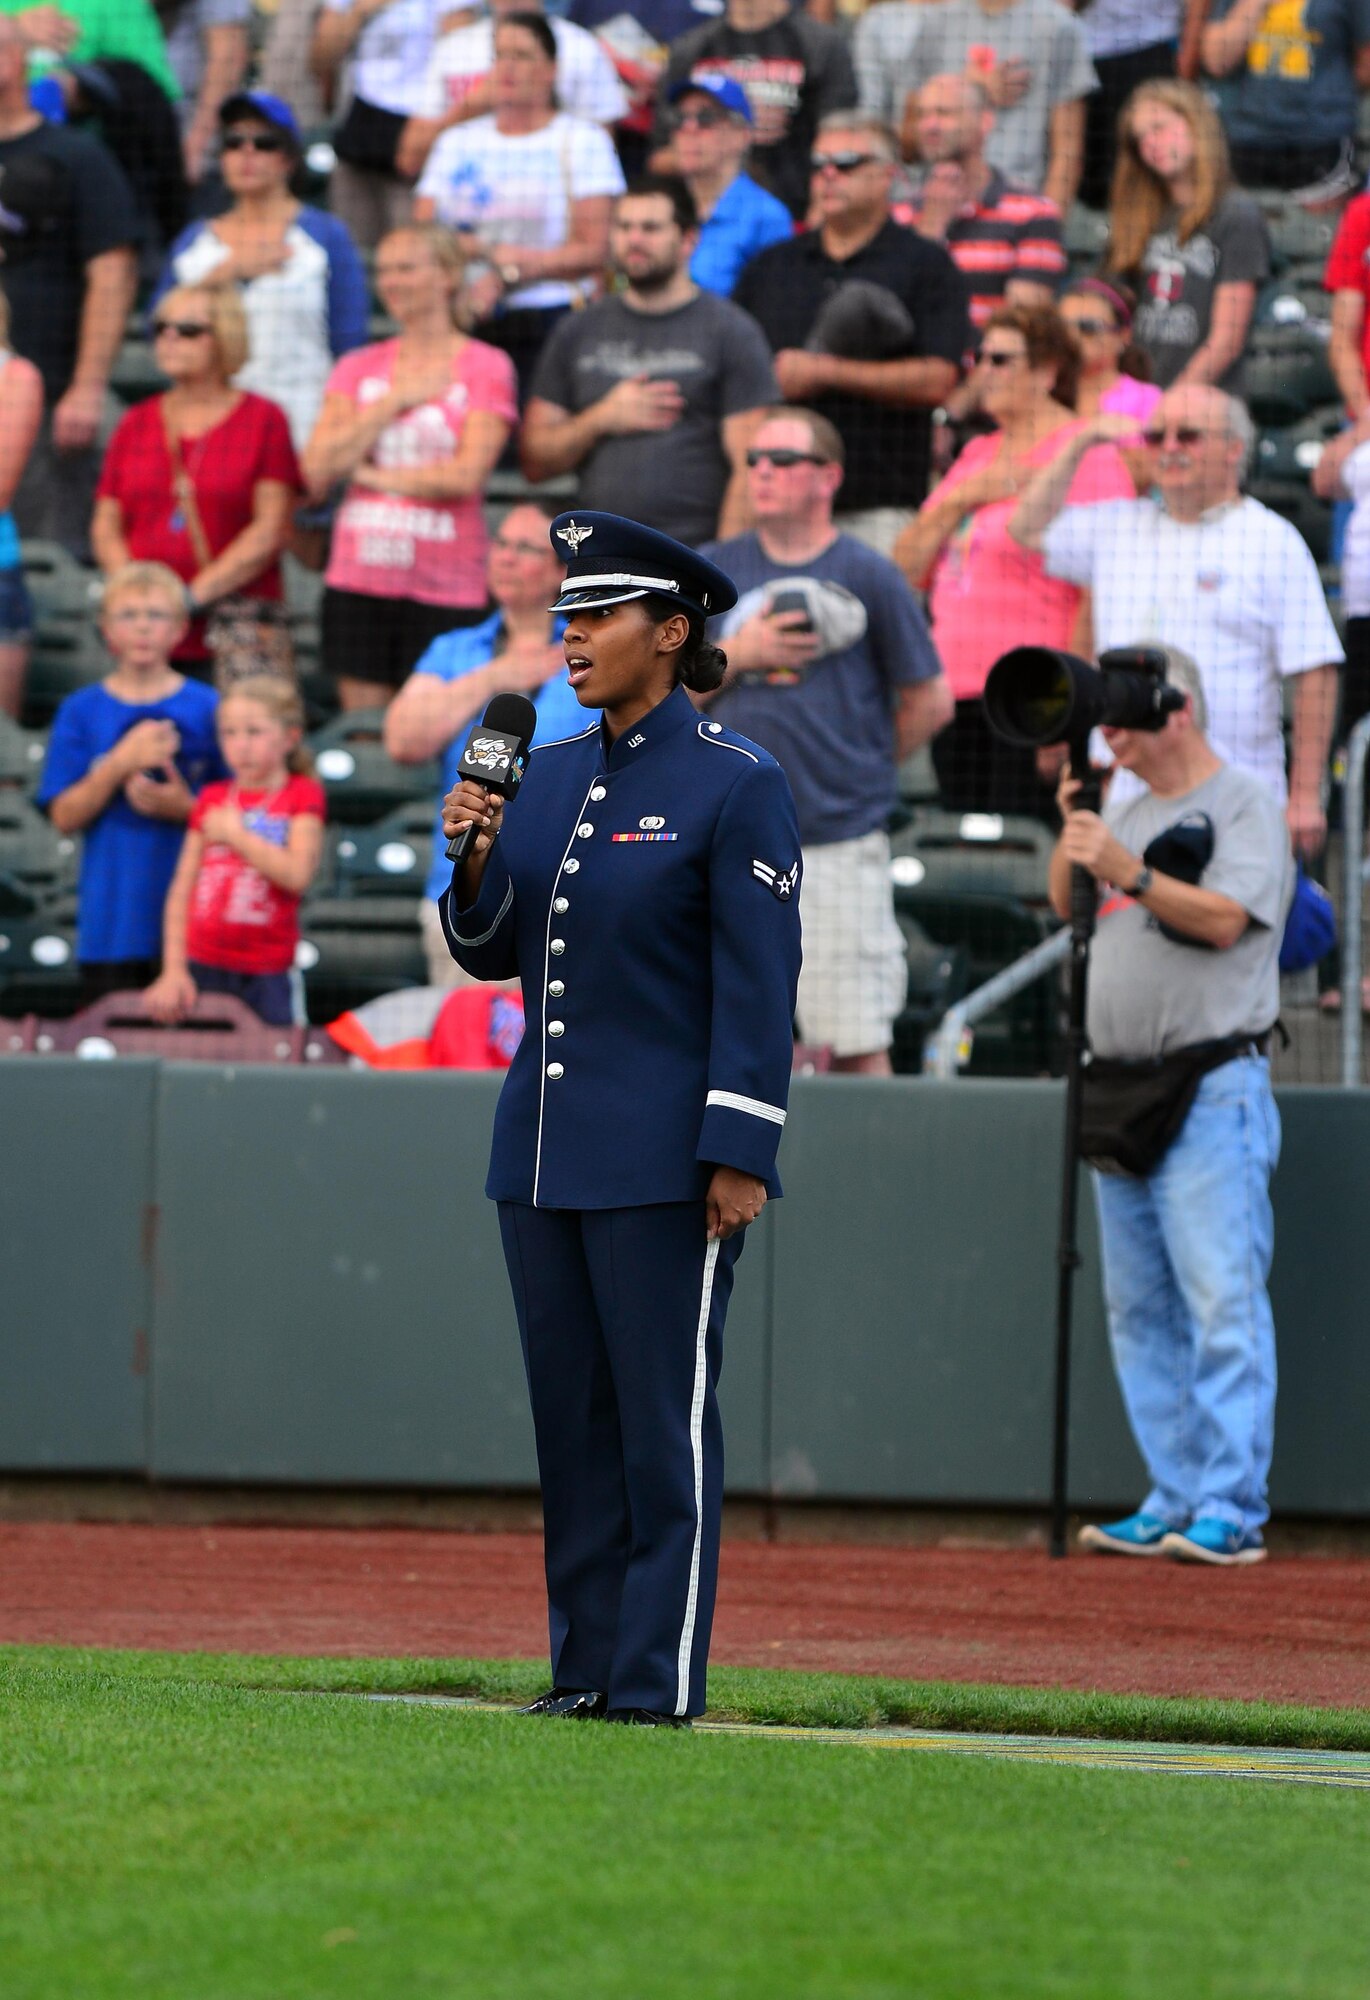 U.S. Air Force Airman 1st Class Sierra Bailey, a vocalist with the U.S. Air Force Heartland of America Band, sings the National Anthem during the Omaha Storm Chaser’s military appreciation night at Werner Park in Papillion, Nebraska Aug. 7.  The Storm Chasers are the Triple-A affiliate of the Kansas City Royals.  (U.S. Air Force photo by Josh Plueger)